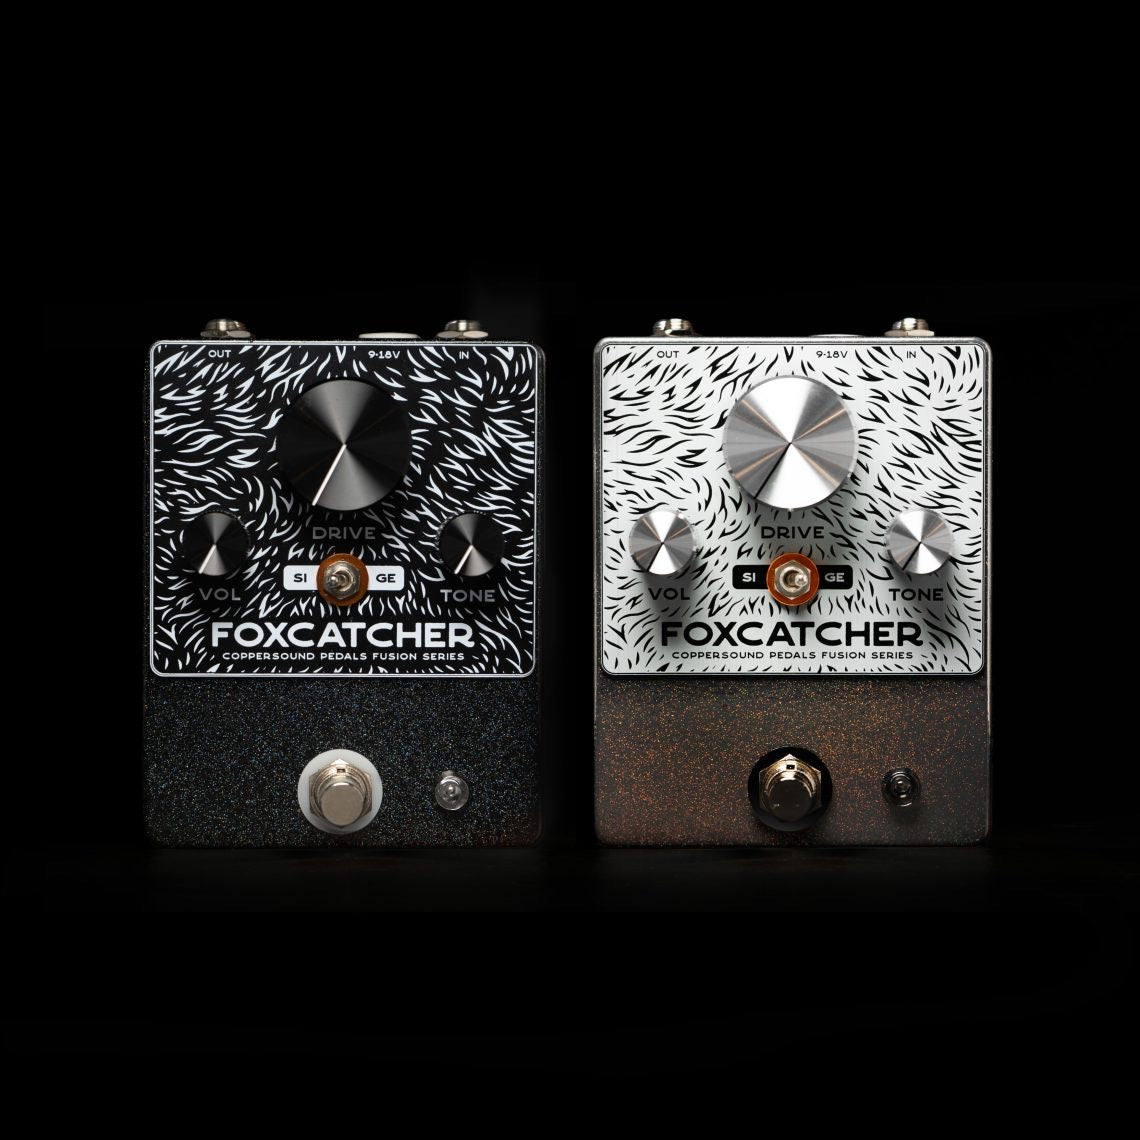 Coppersound Pedals Foxcatcher Fusion Series (Black Rainbow)